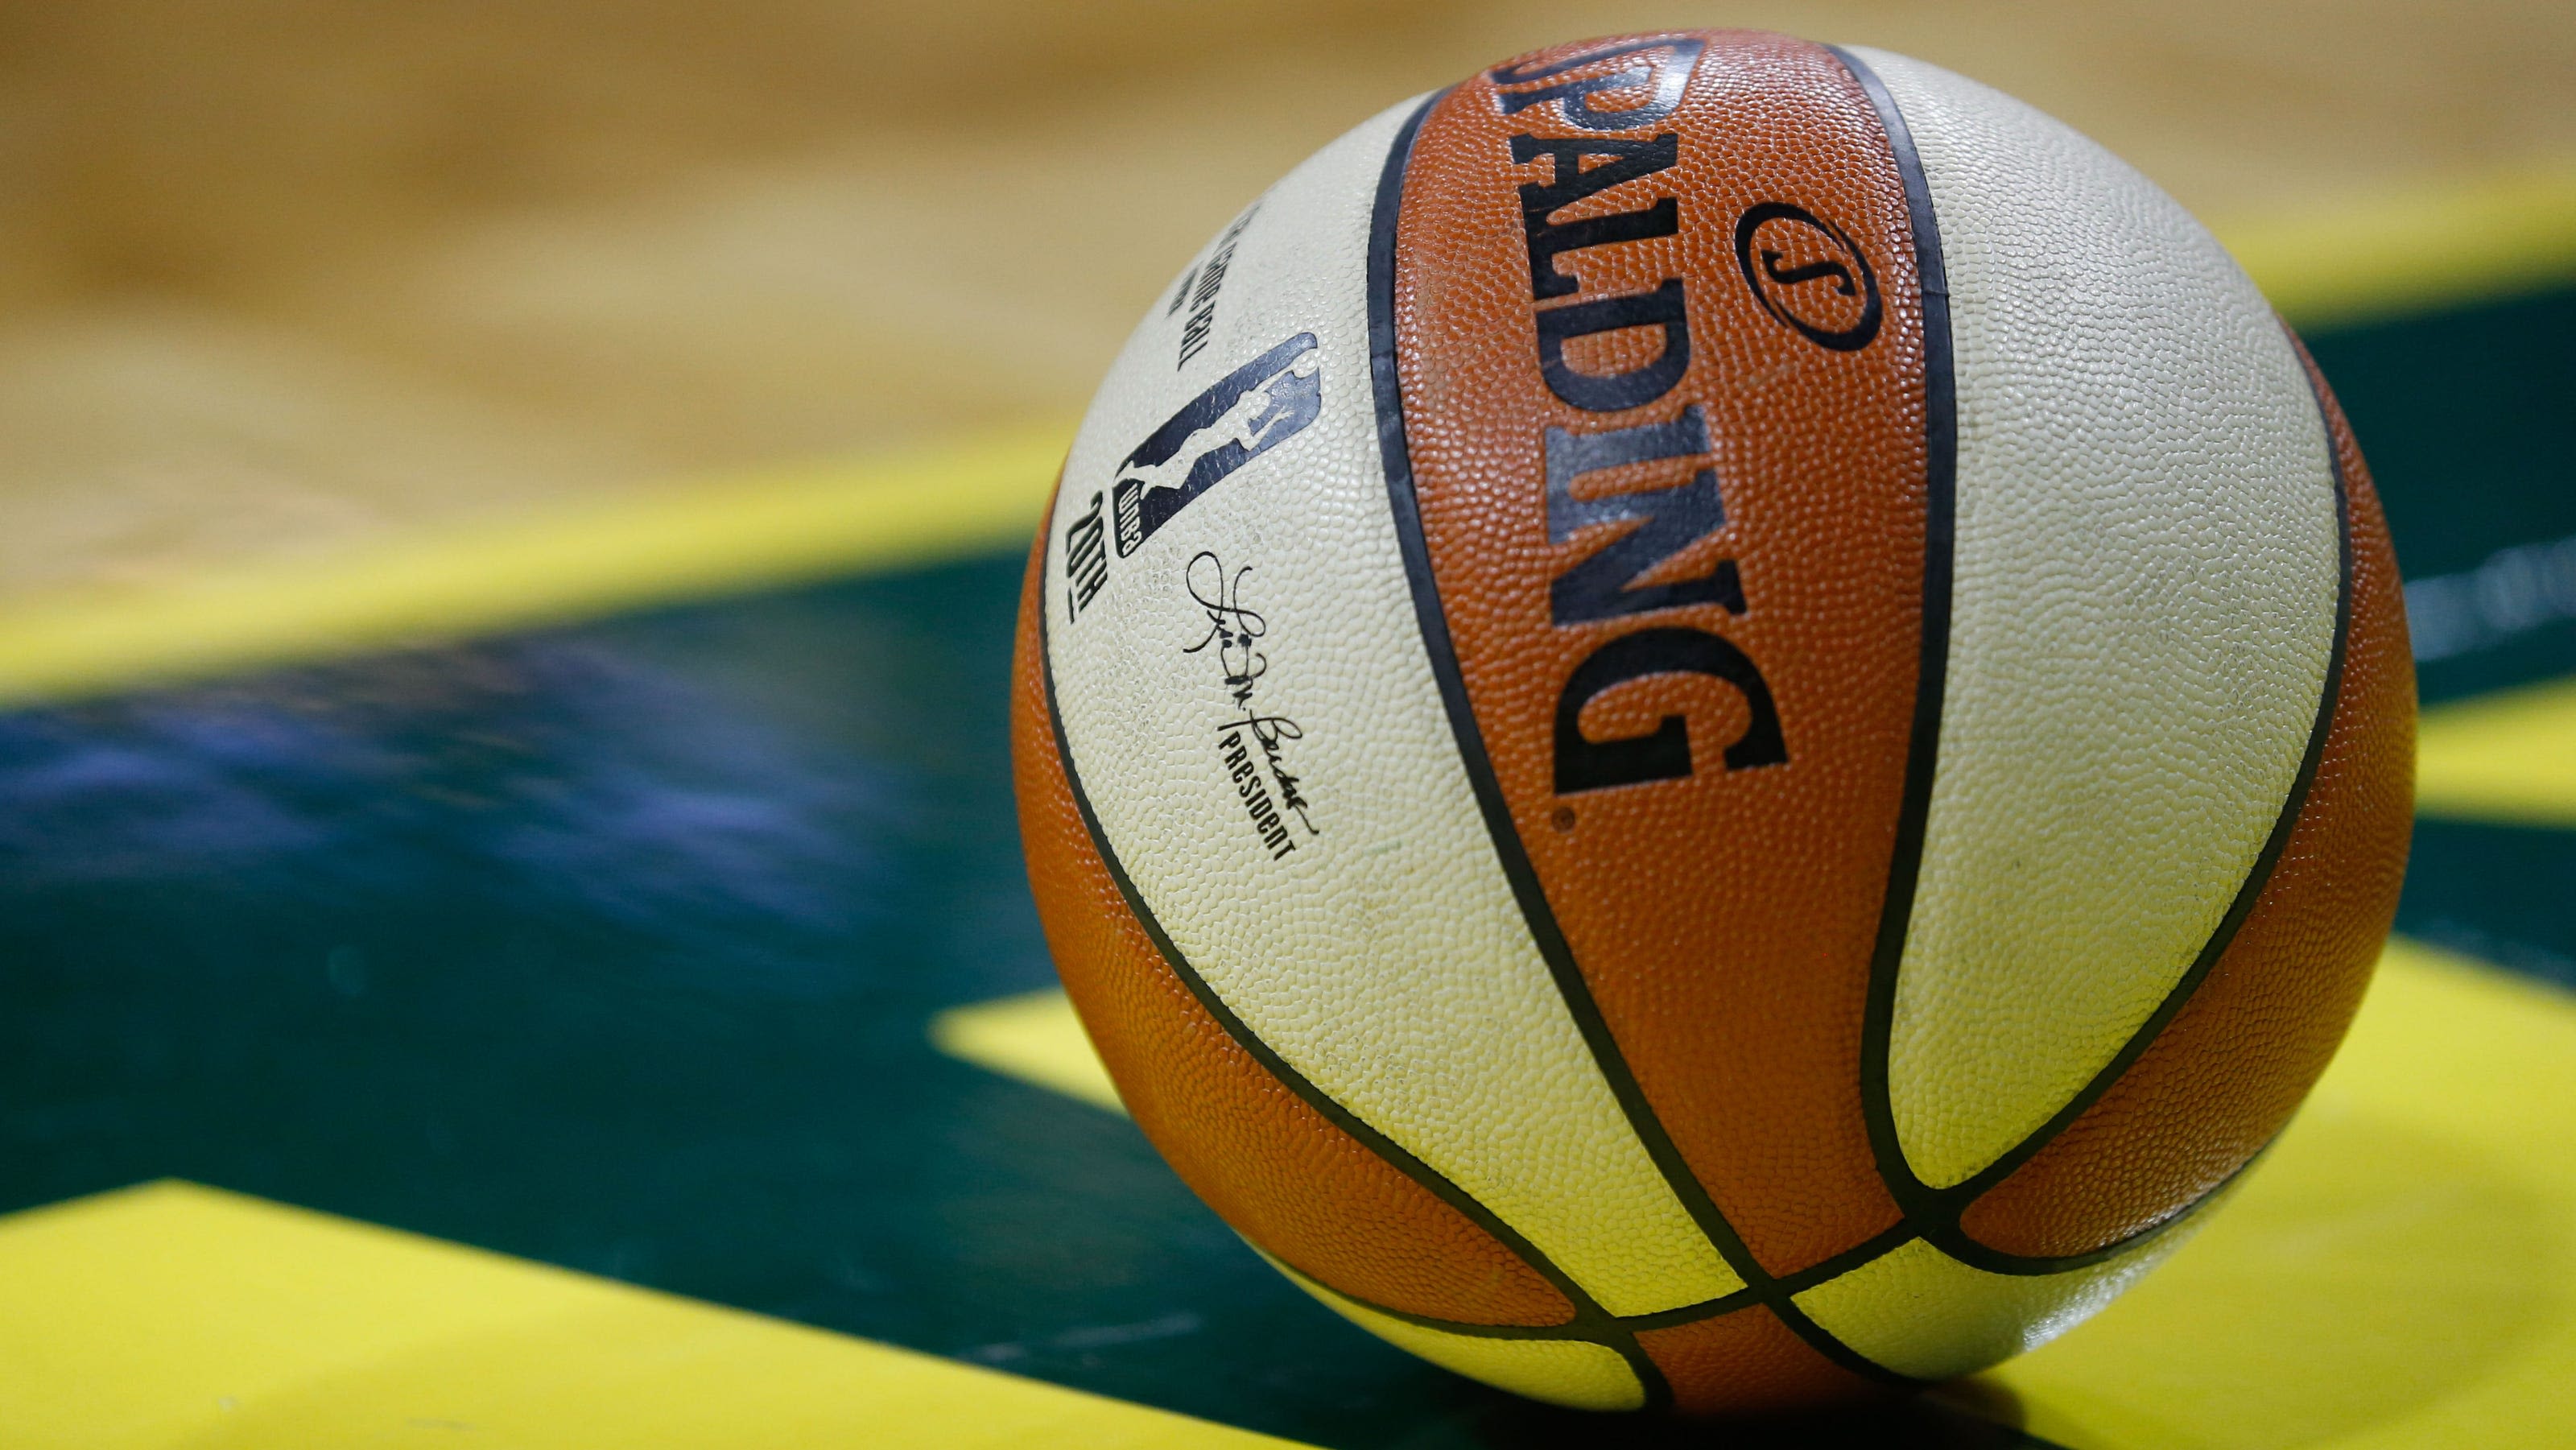 WNBA expansion teams: Toronto joins field as league continues growth